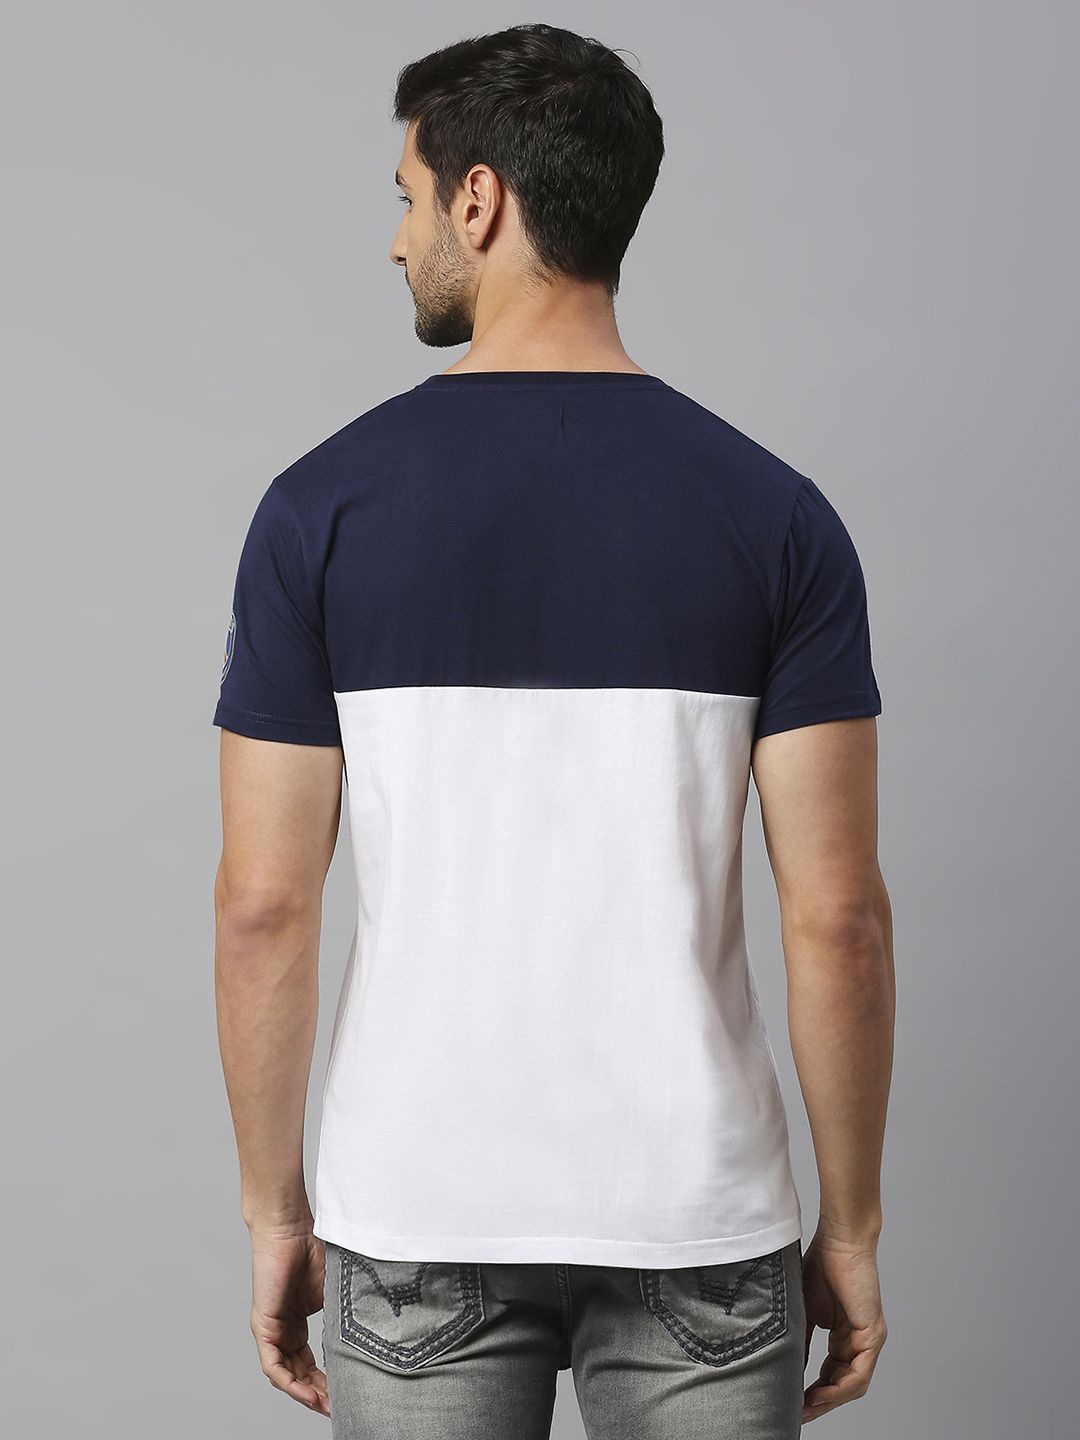 Men White Blue Printed Round Neck Crest T-Shirt From Fancode Shop.